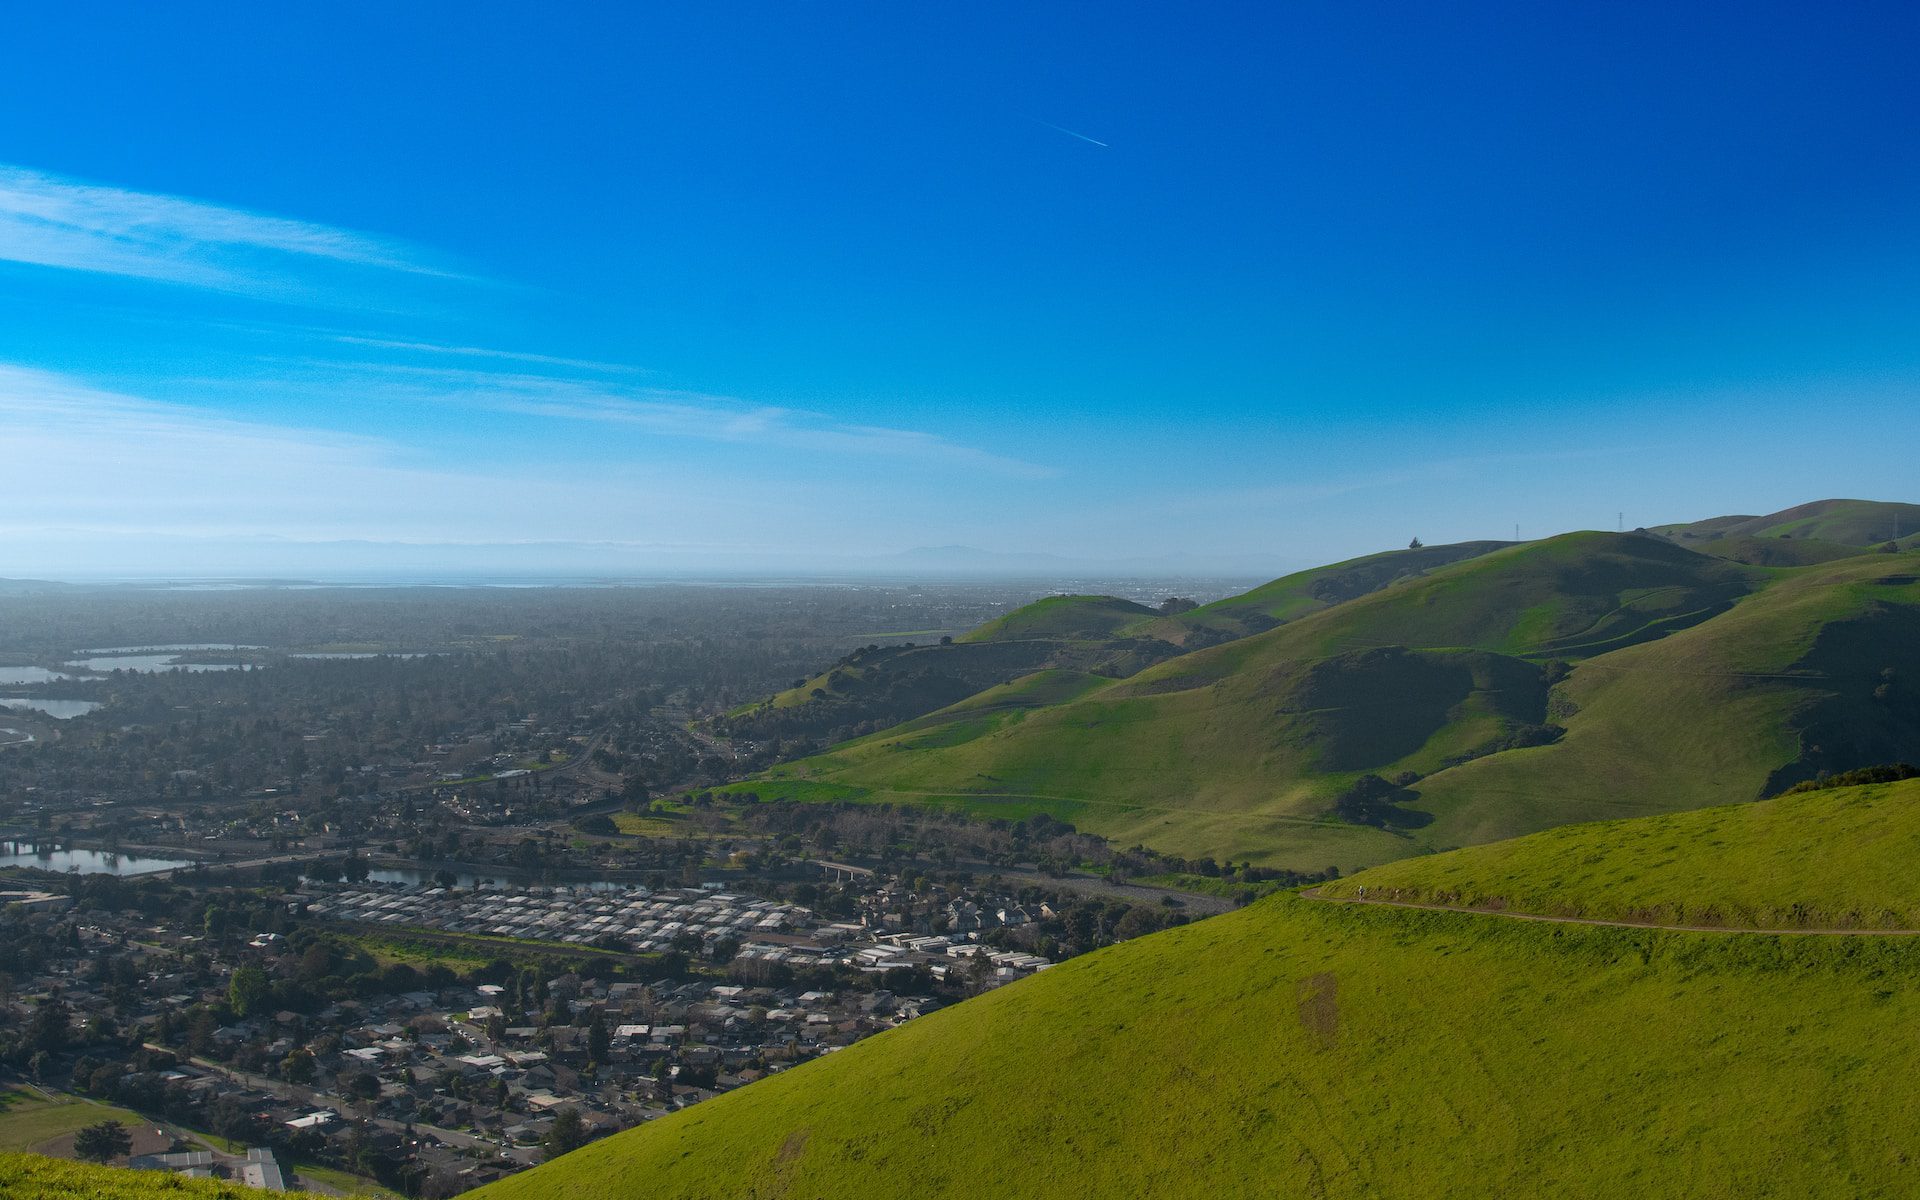 City view from hilltop in Fremont, California.